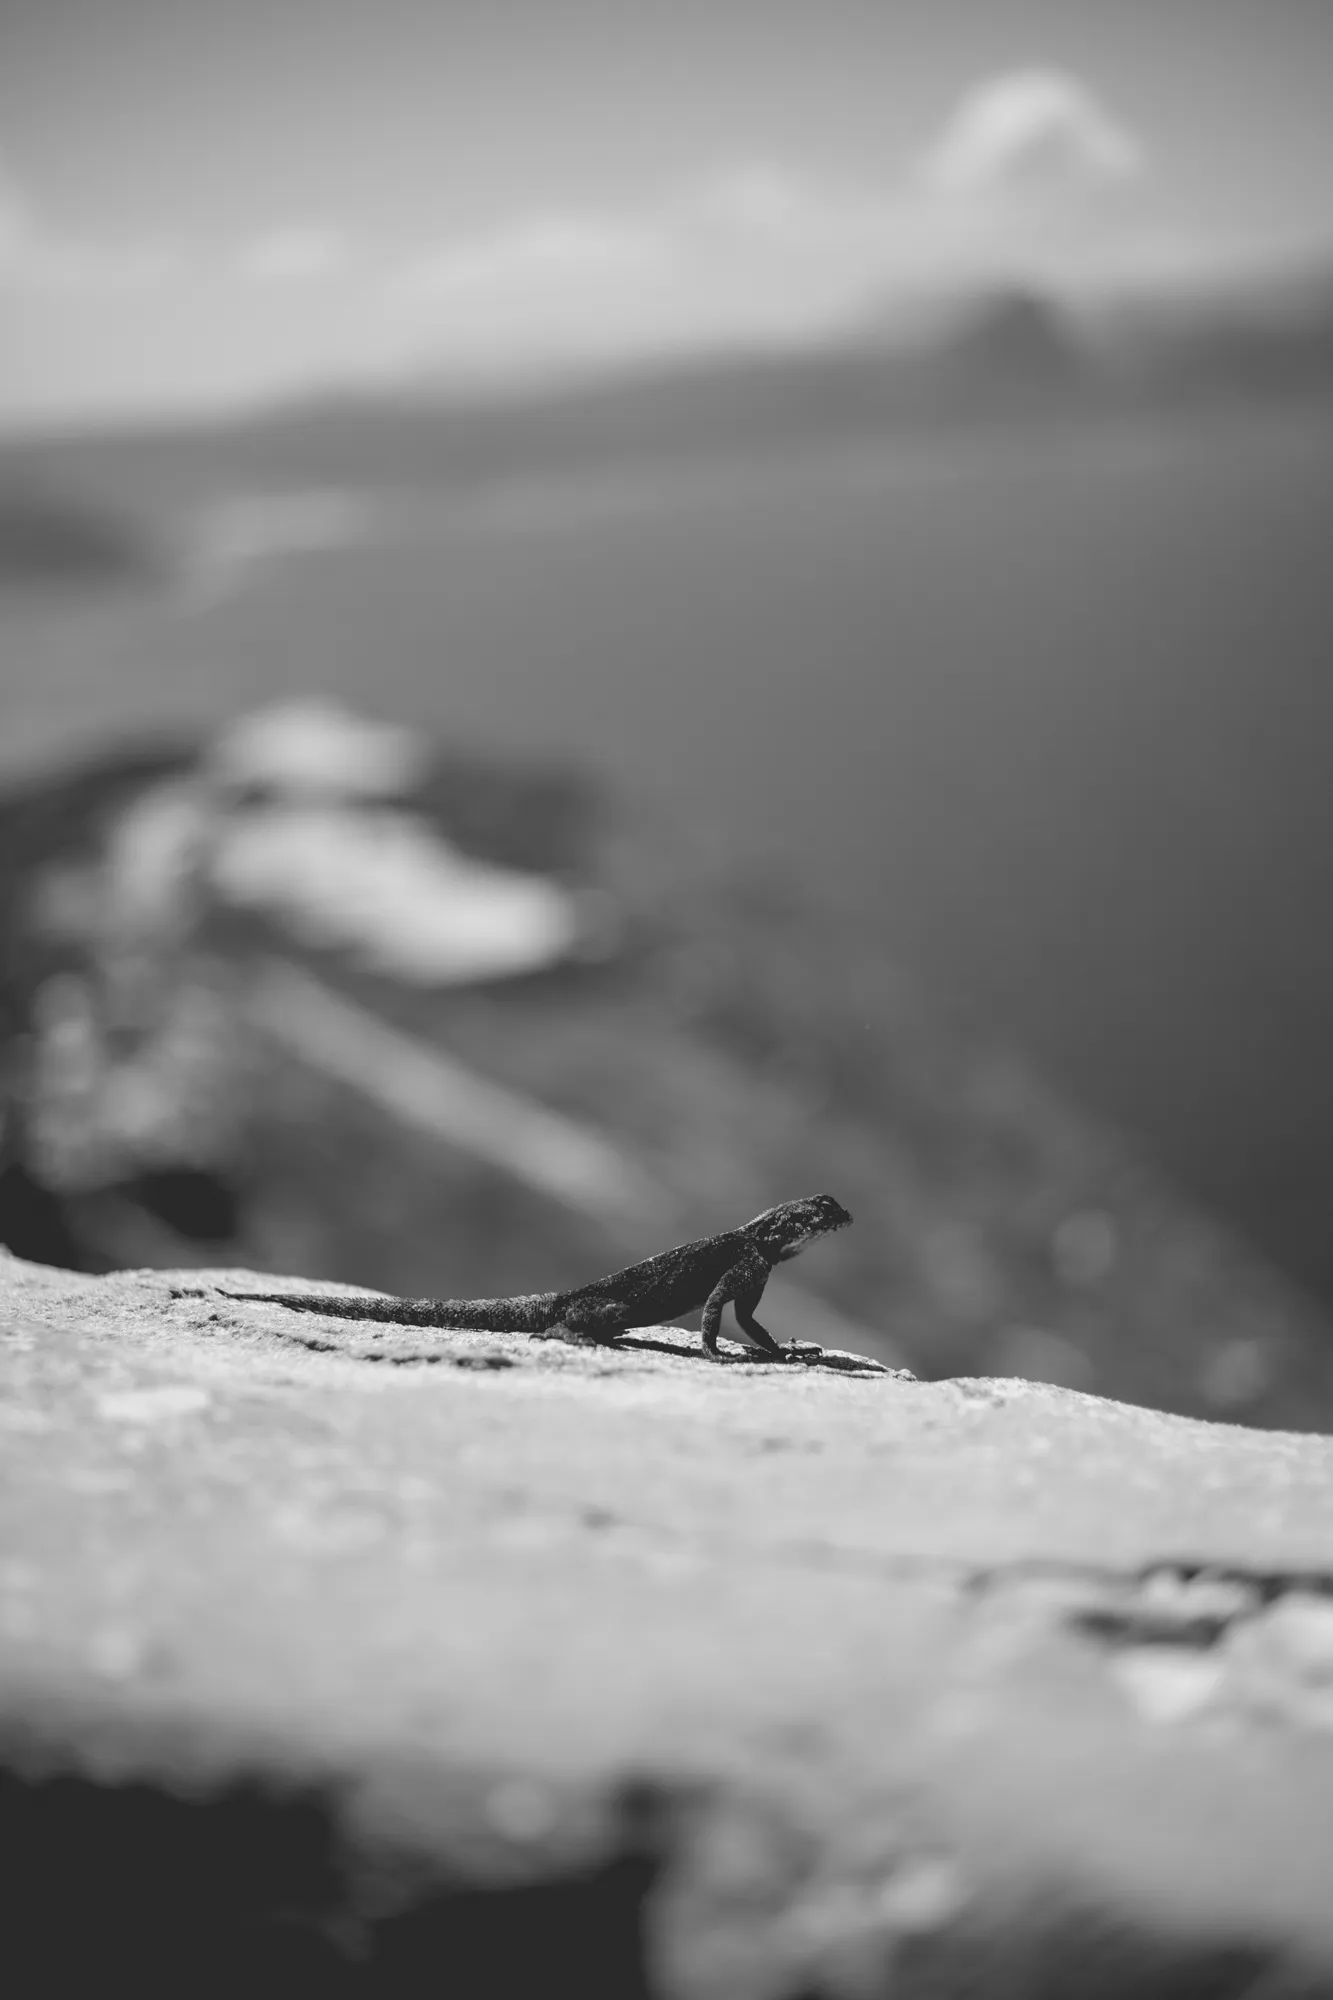 2022-02-16 - Cape Town - Lizard on rock with ocean and mountains in the background